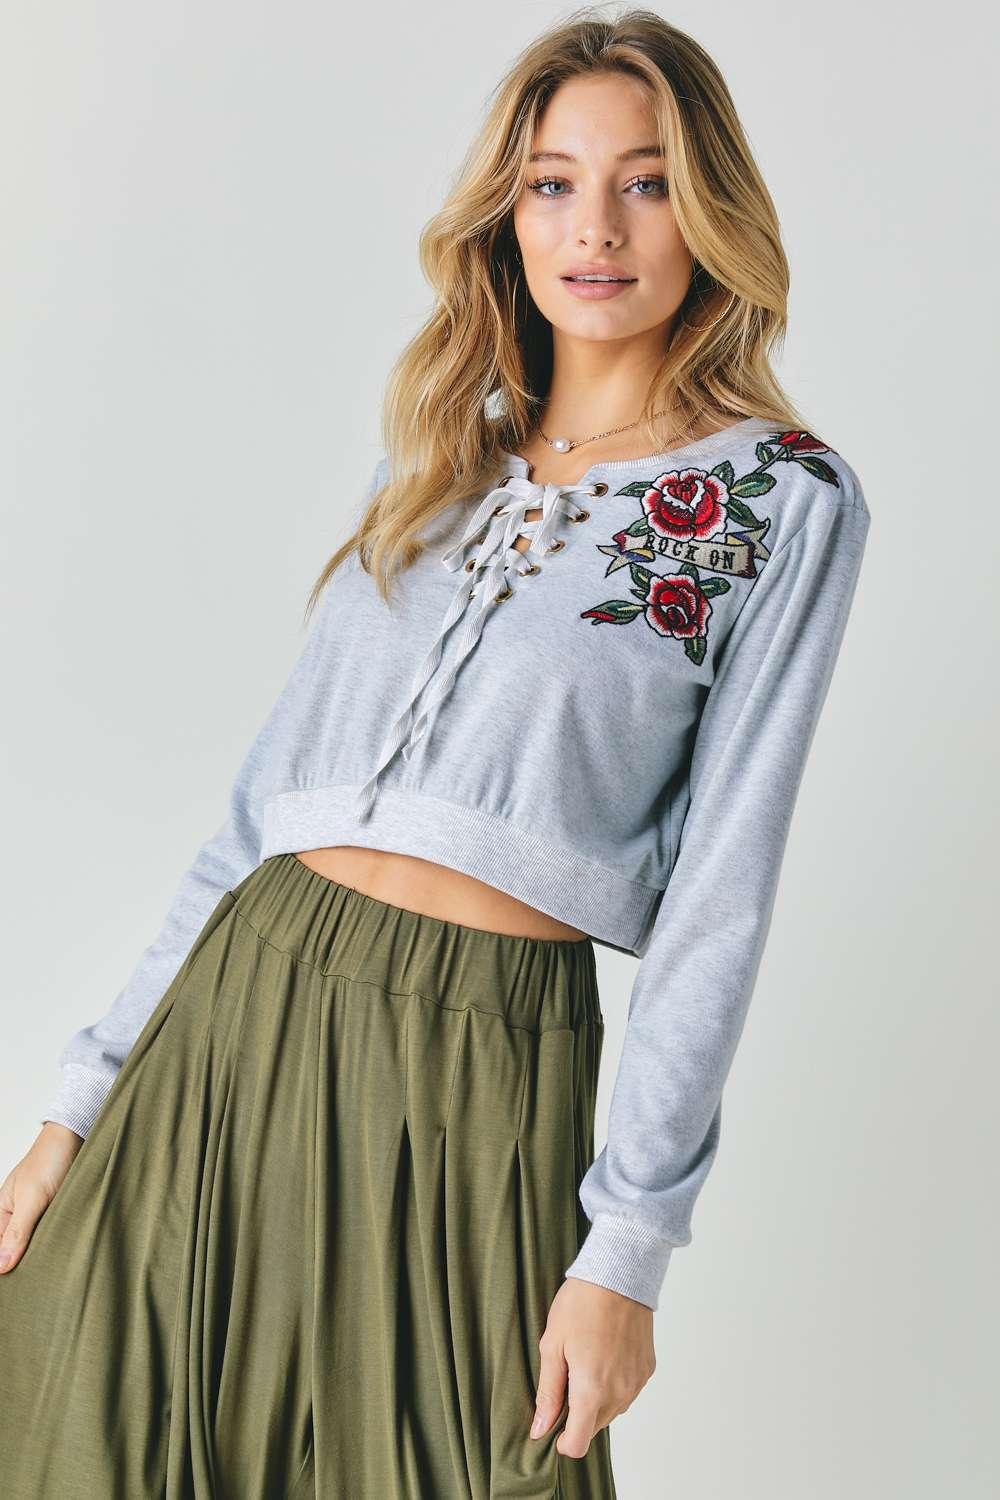 Floral Embroidered Cropped Sweatshirt Naughty Smile Fashion